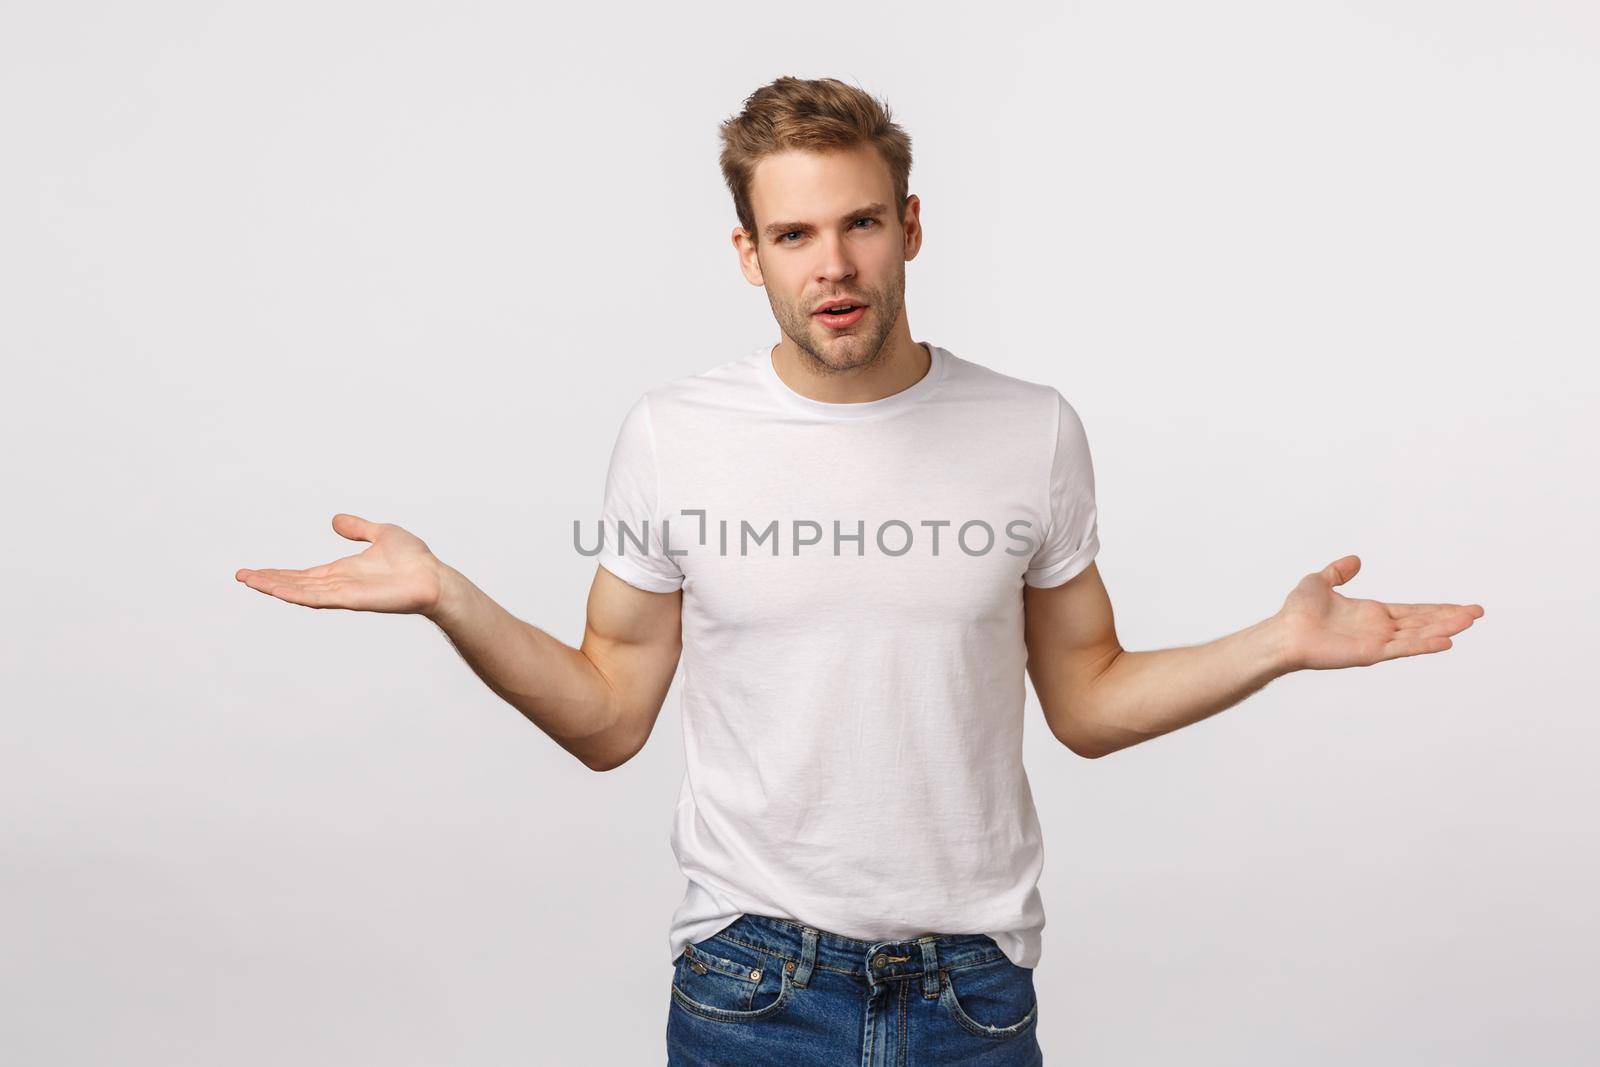 What do you want from me. Annoyed and aggressive questioned, puzzled blond handsome man trying deal with strange accusation, spread hands sideways, stare camera confused, white background.